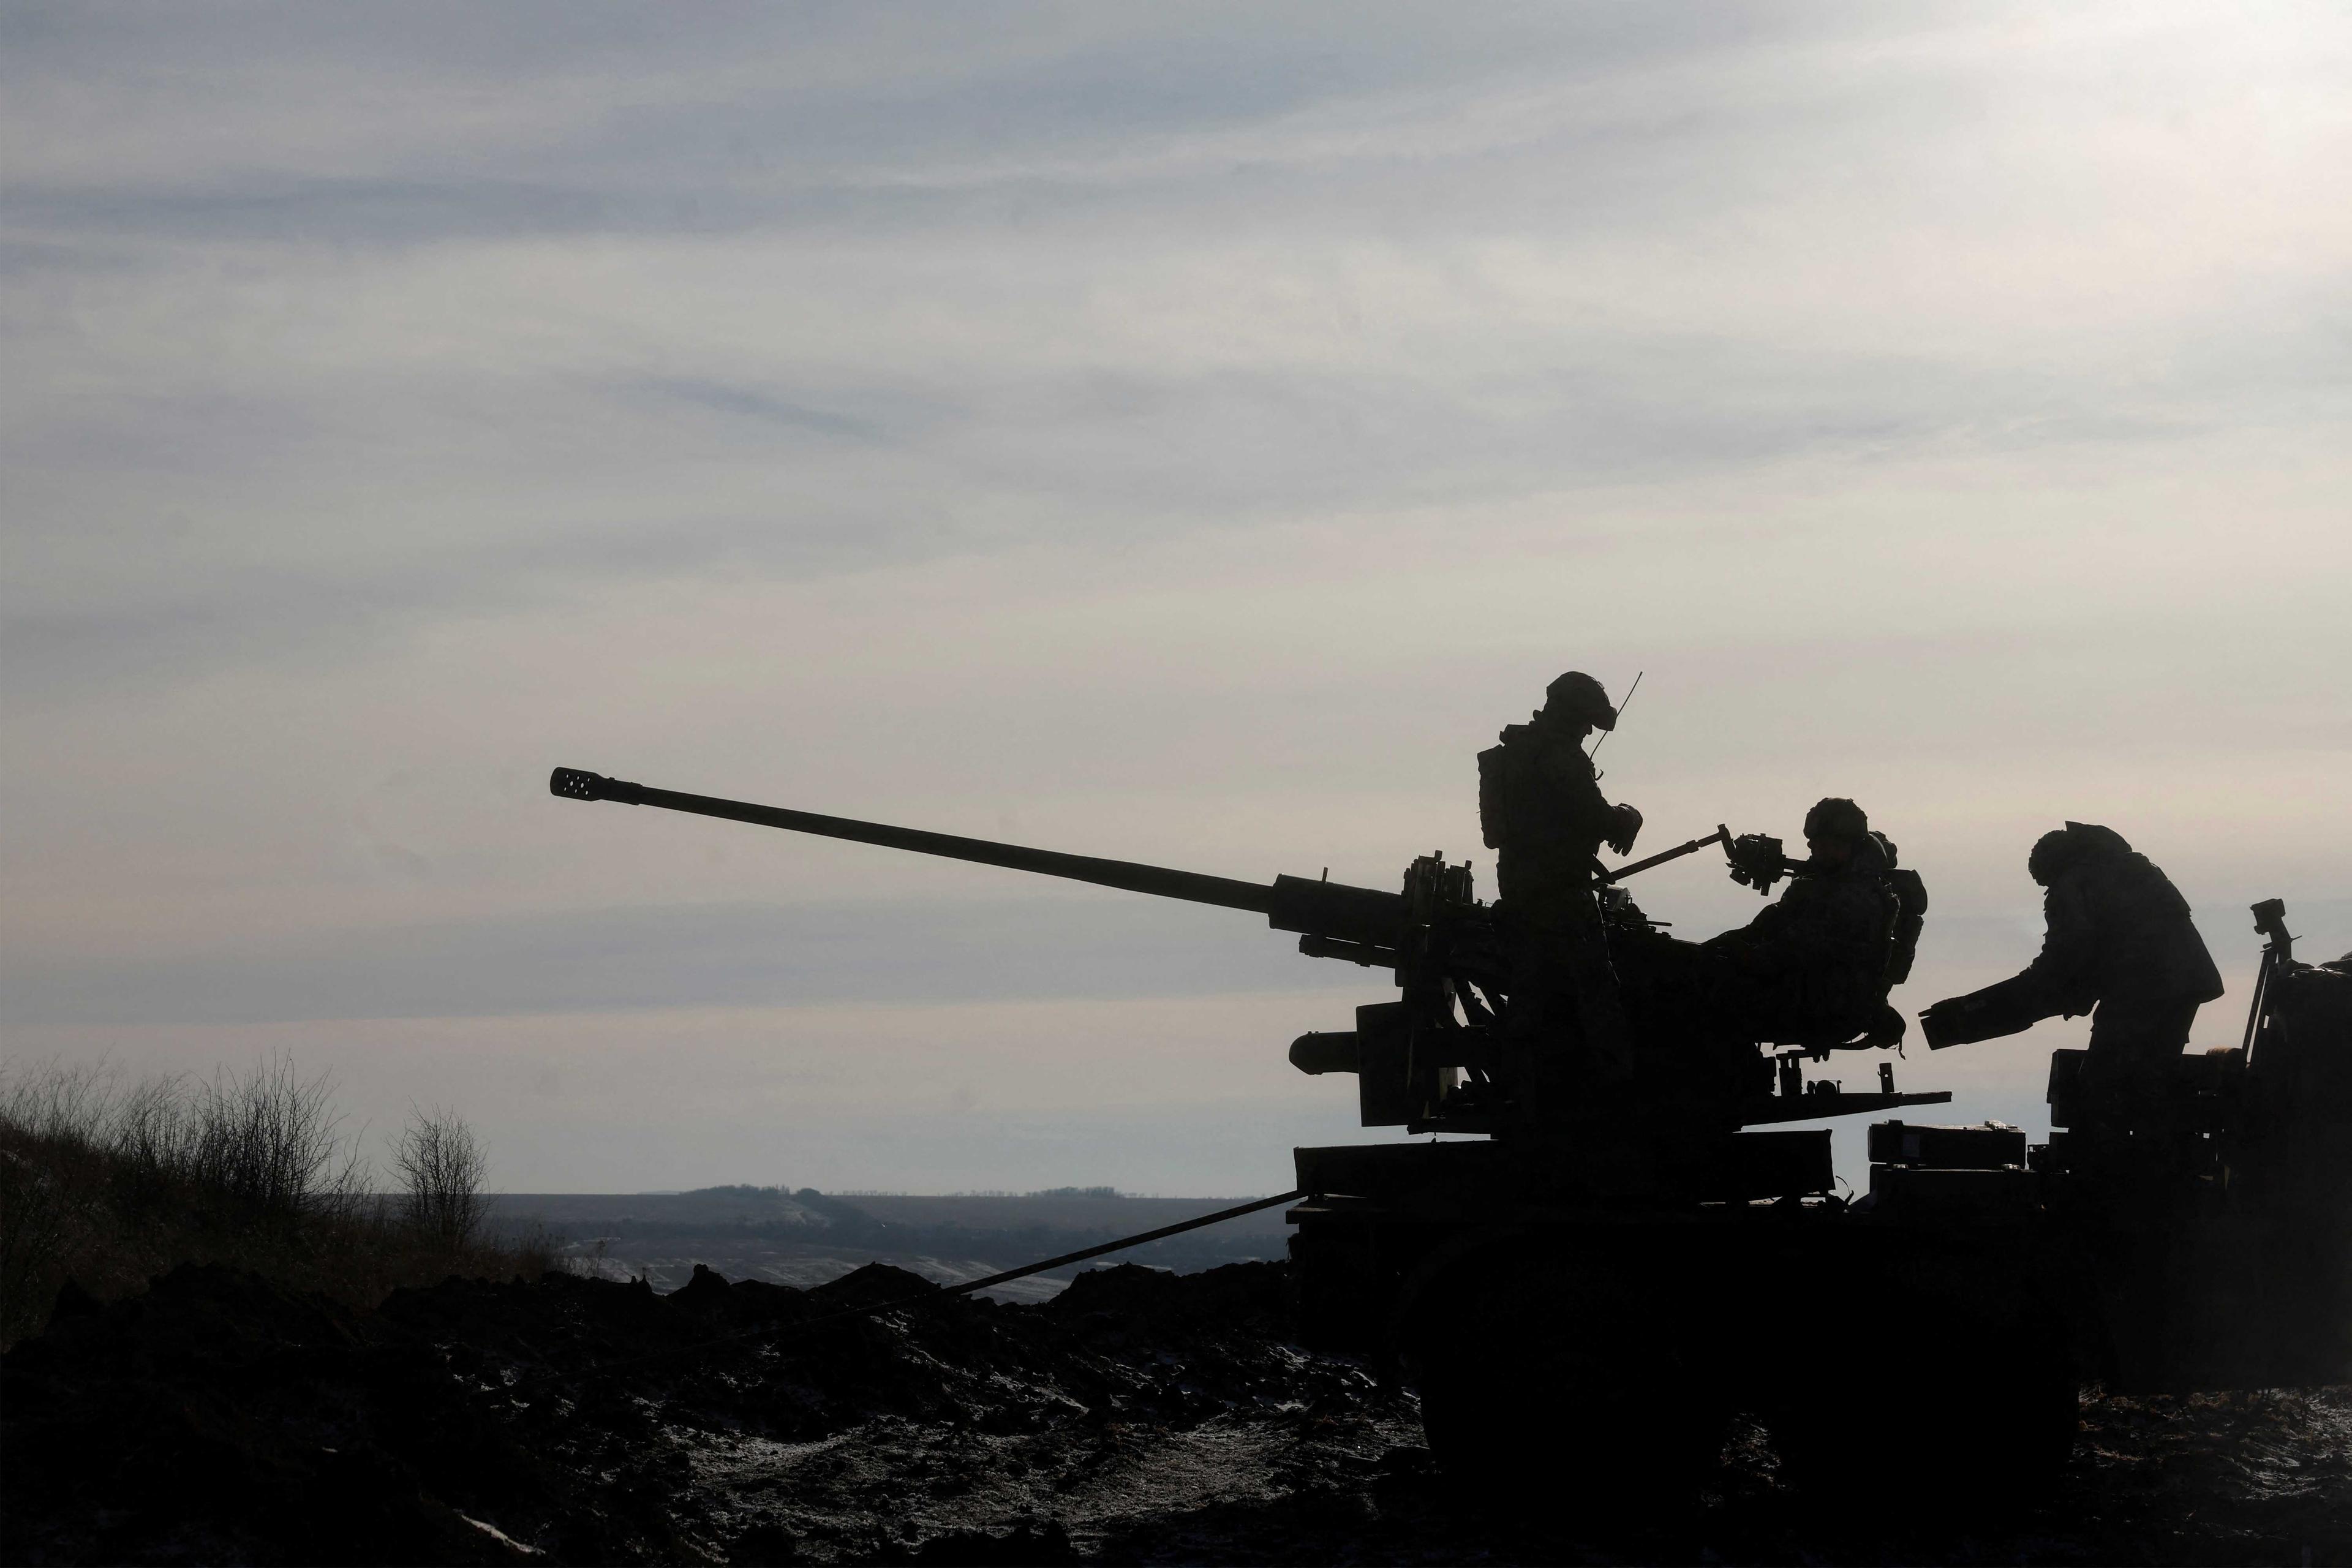 Ukrainian members of the military prepare to fire an anti-aircraft weapon, as Russia's attack on Ukraine continues, in the frontline city of Bakhmut, Ukraine, Jan 10. Photo: Reuters